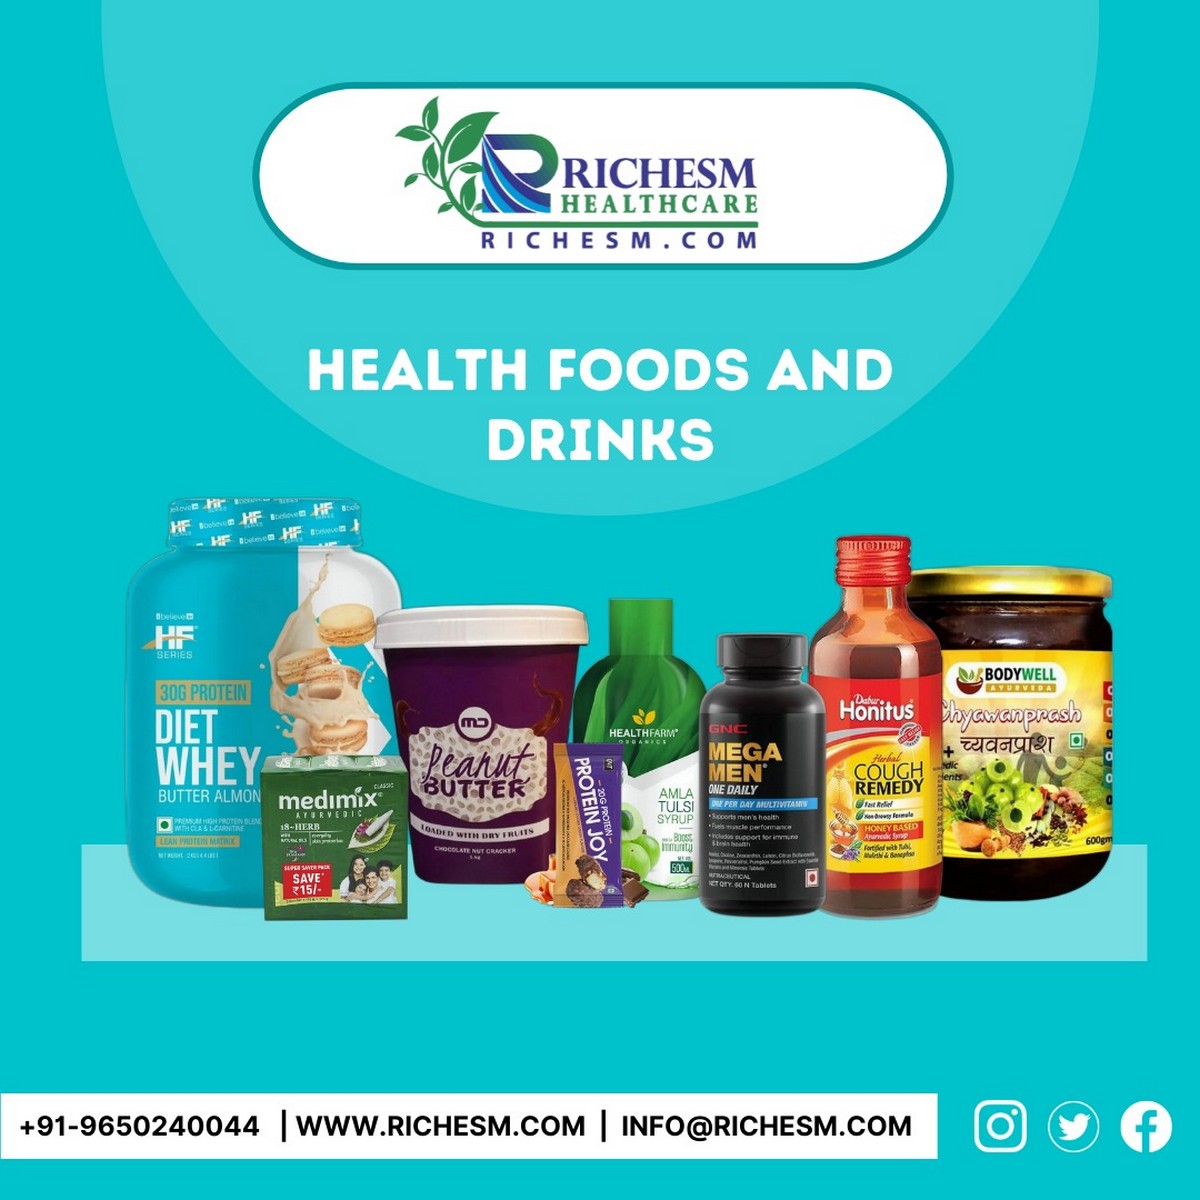 Health foods and drinks